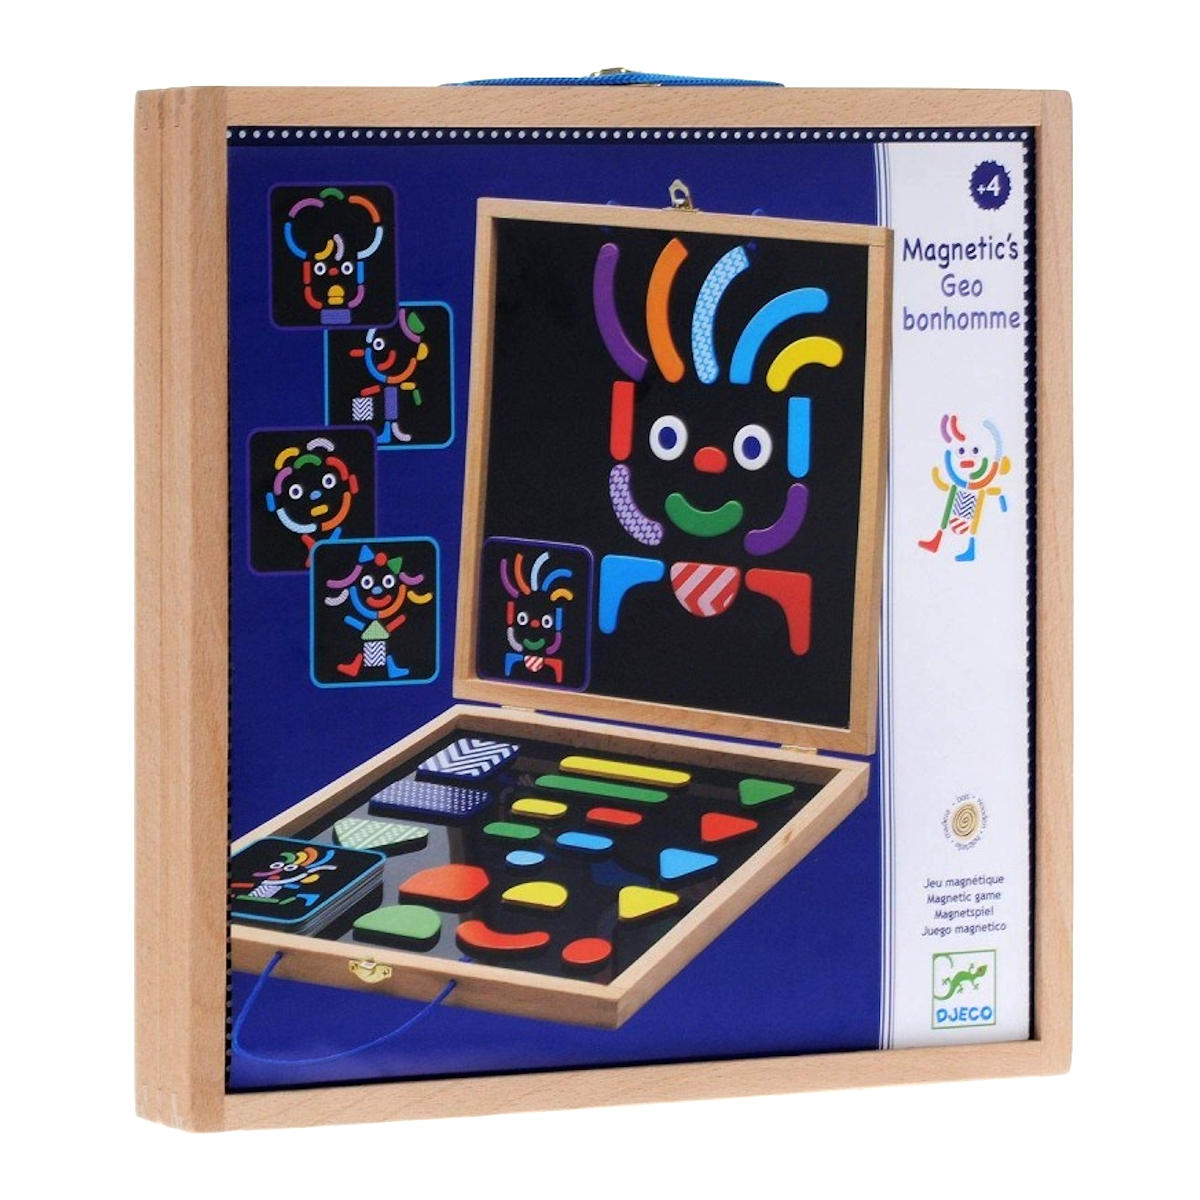 Magnetic's Geo Bonhomme - Forme Magnetiche - Djeco